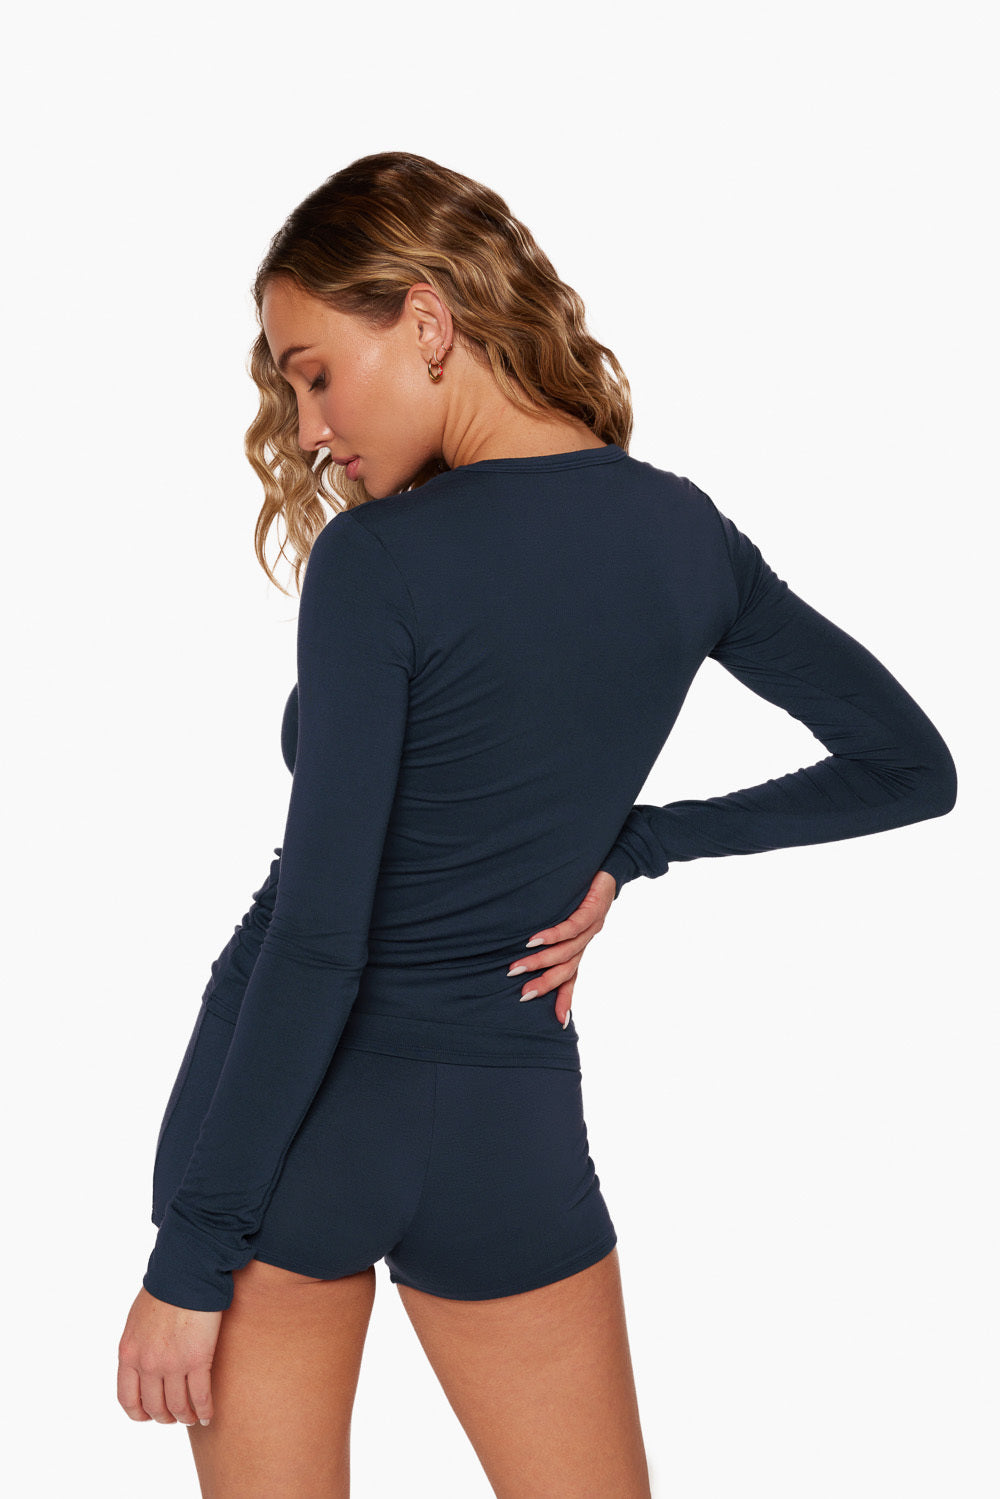 SLEEP JERSEY FITTED LONG SLEEVE IN OXFORD